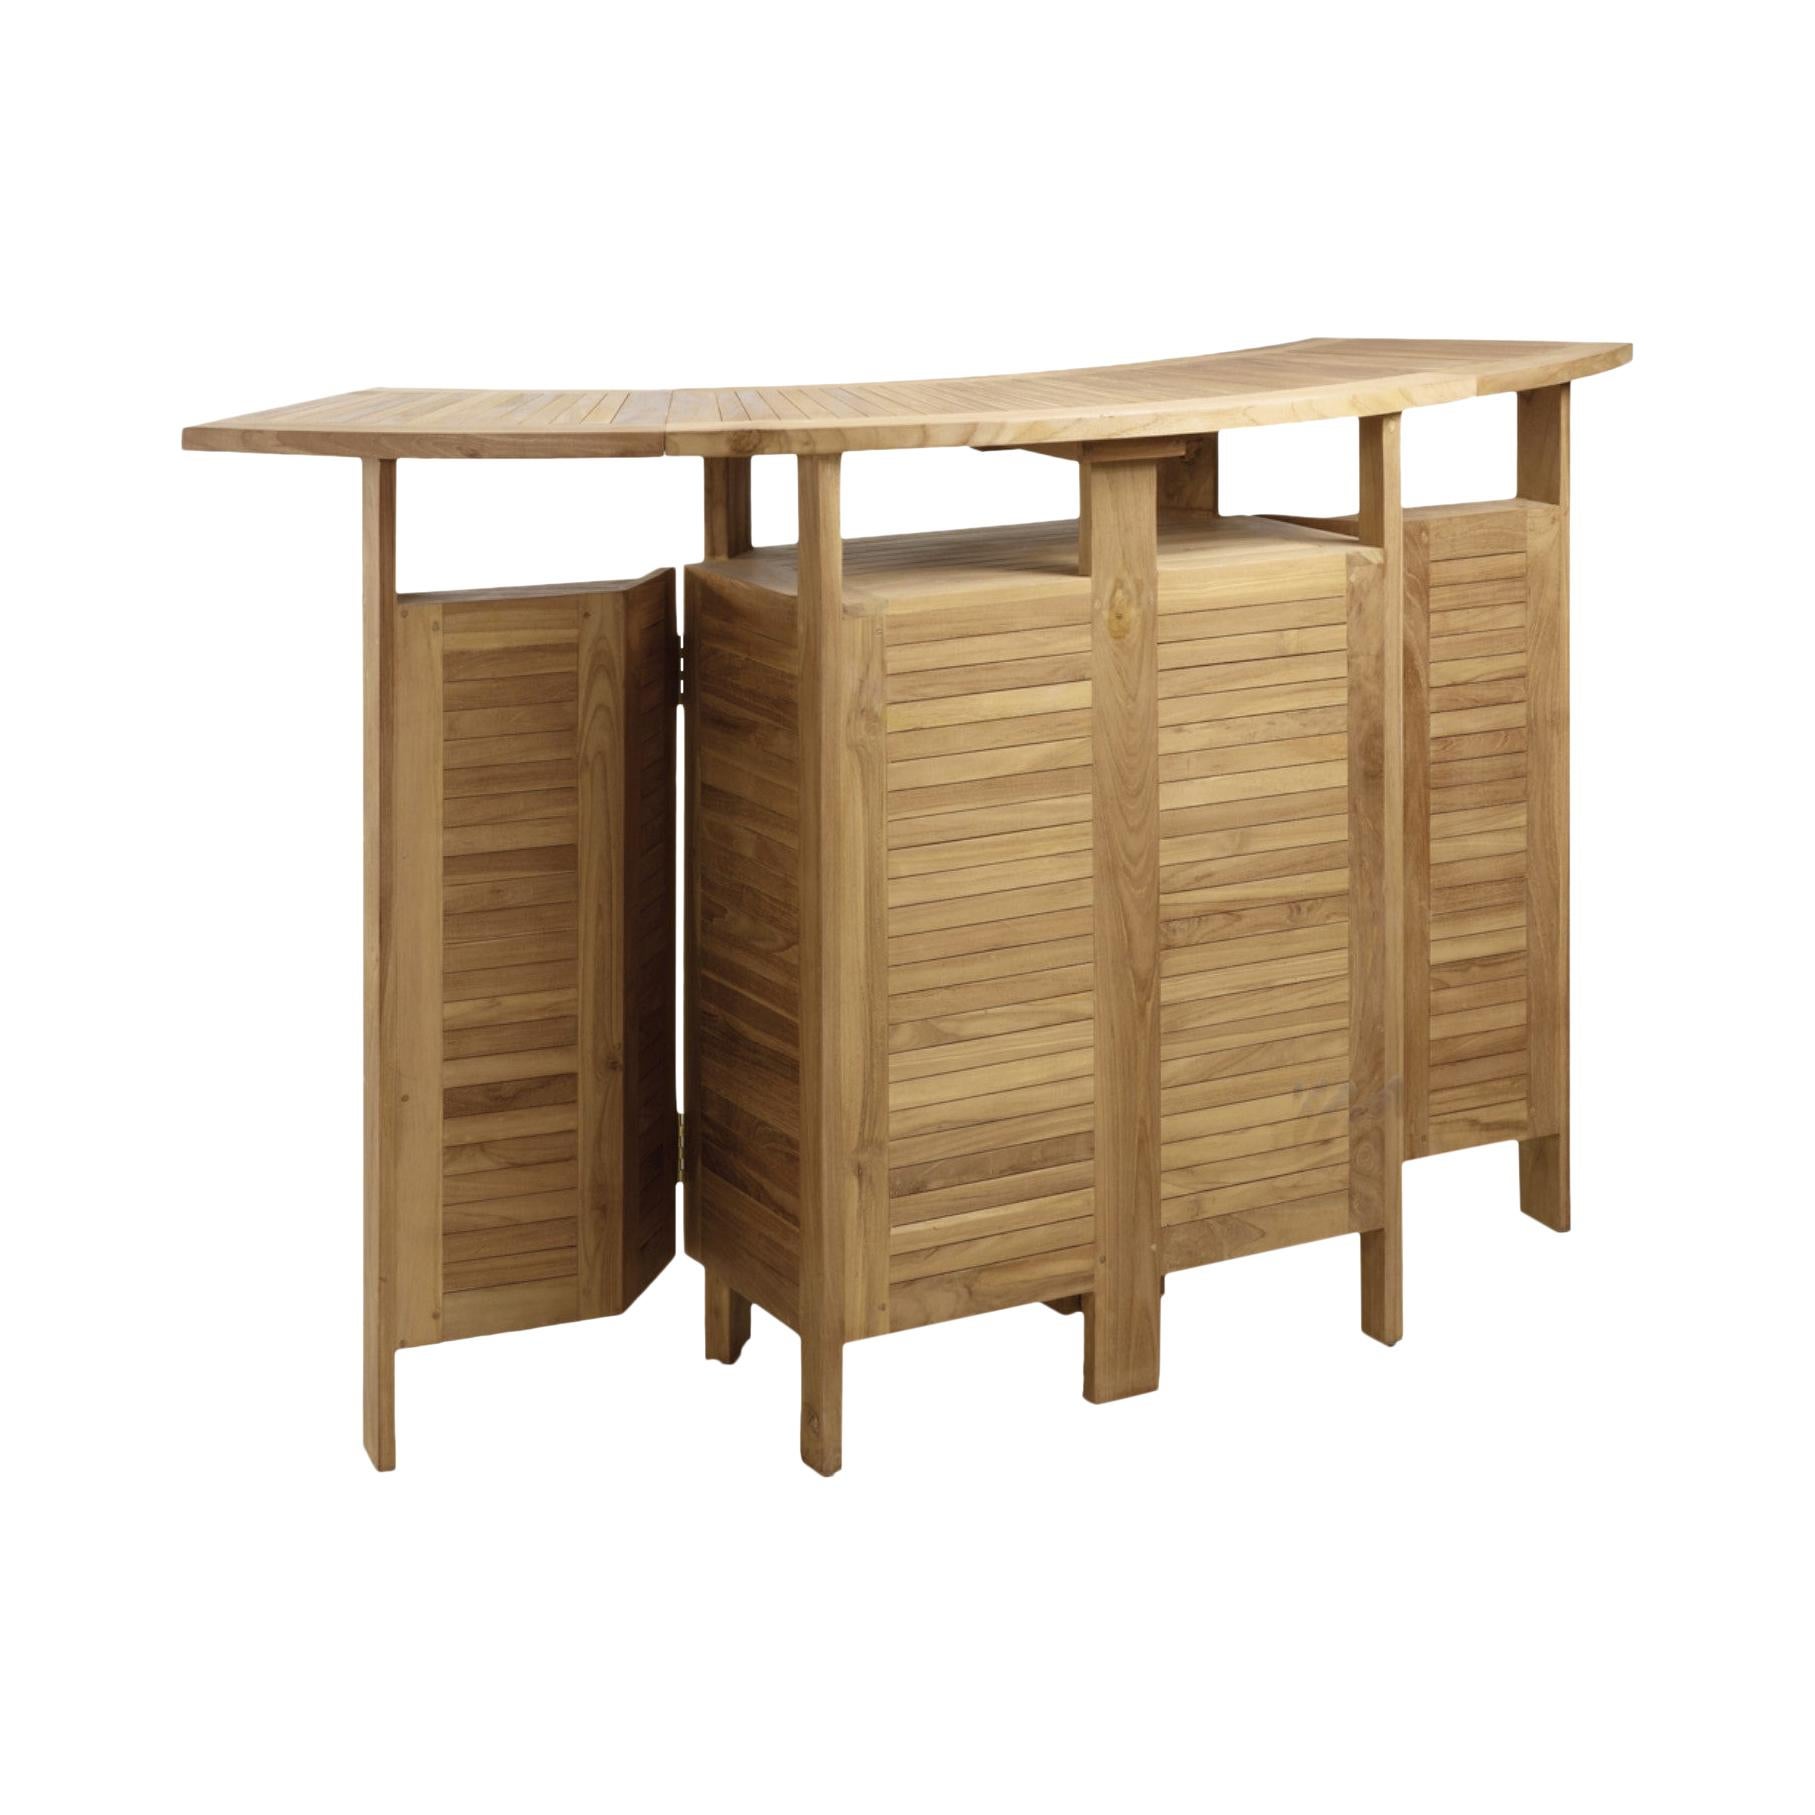 New Teak Foldable Dry Bar, Indoor and Outdoor